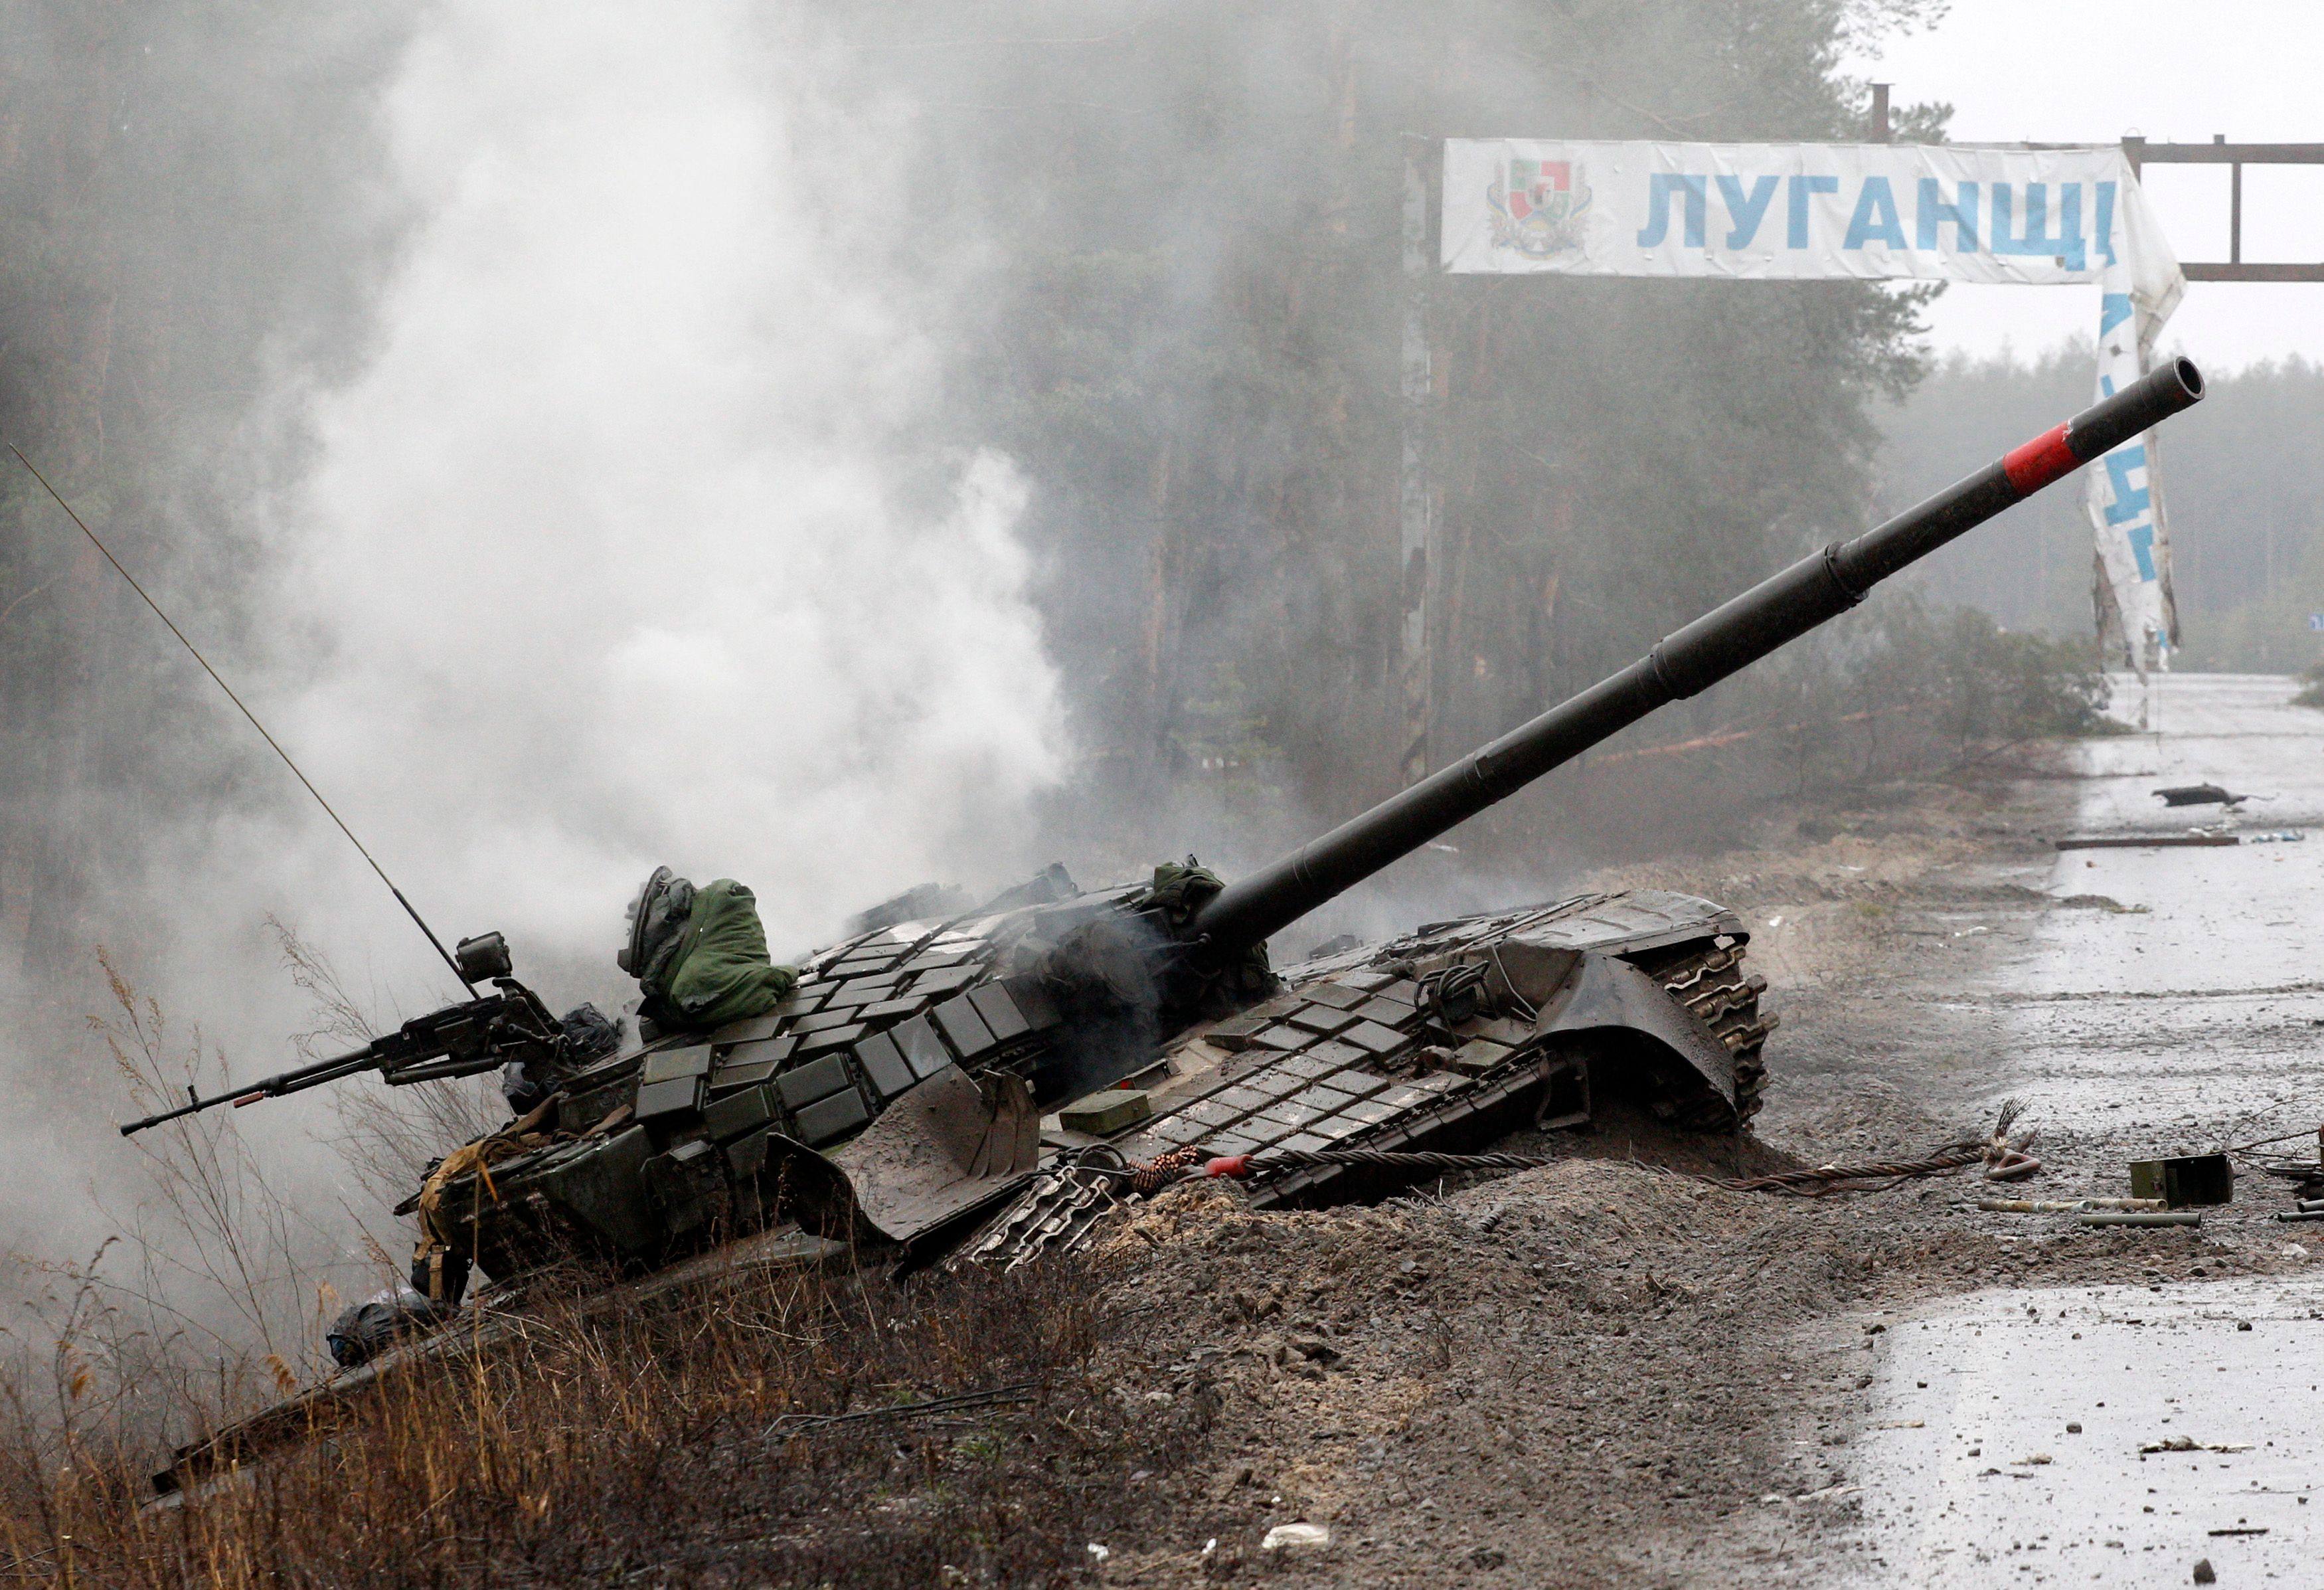 Smoke rises from a Russian tank destroyed by Ukrainian forces. According to UK intelligence, Russia is losing close to a 1,000 troops a day on the Ukraine battlefield. Photo: AFP